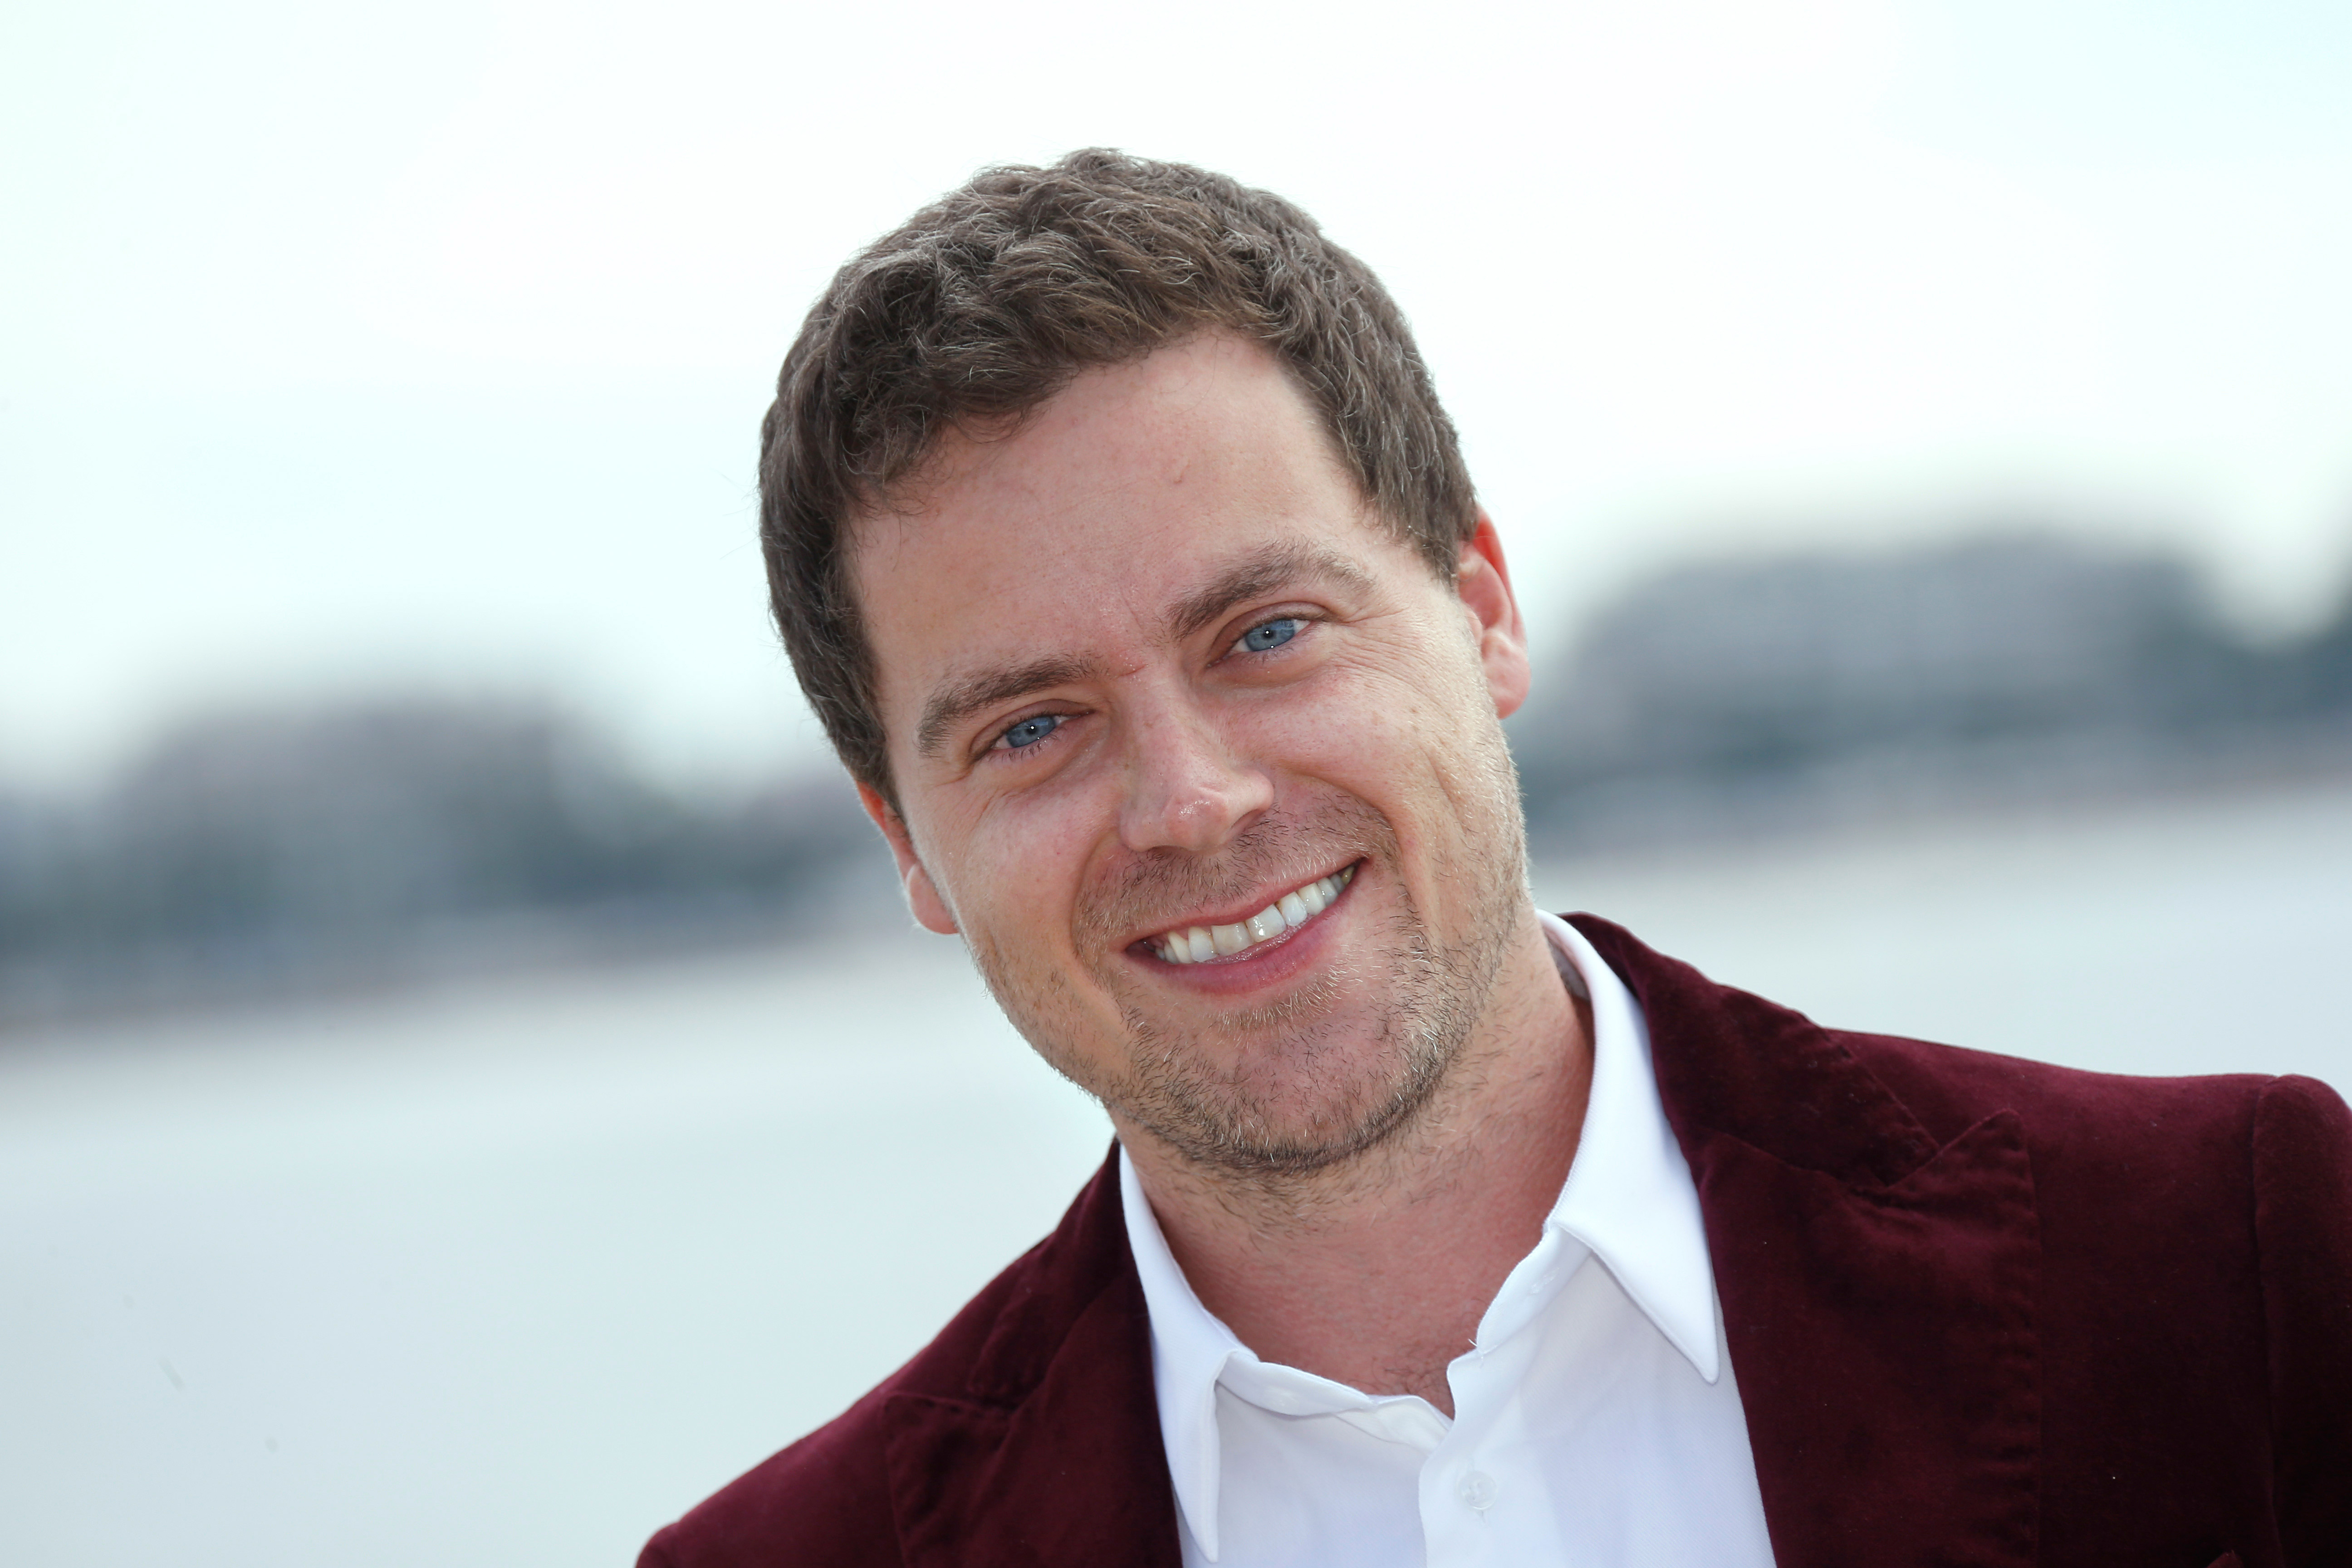 Greg poehler movies and tv shows